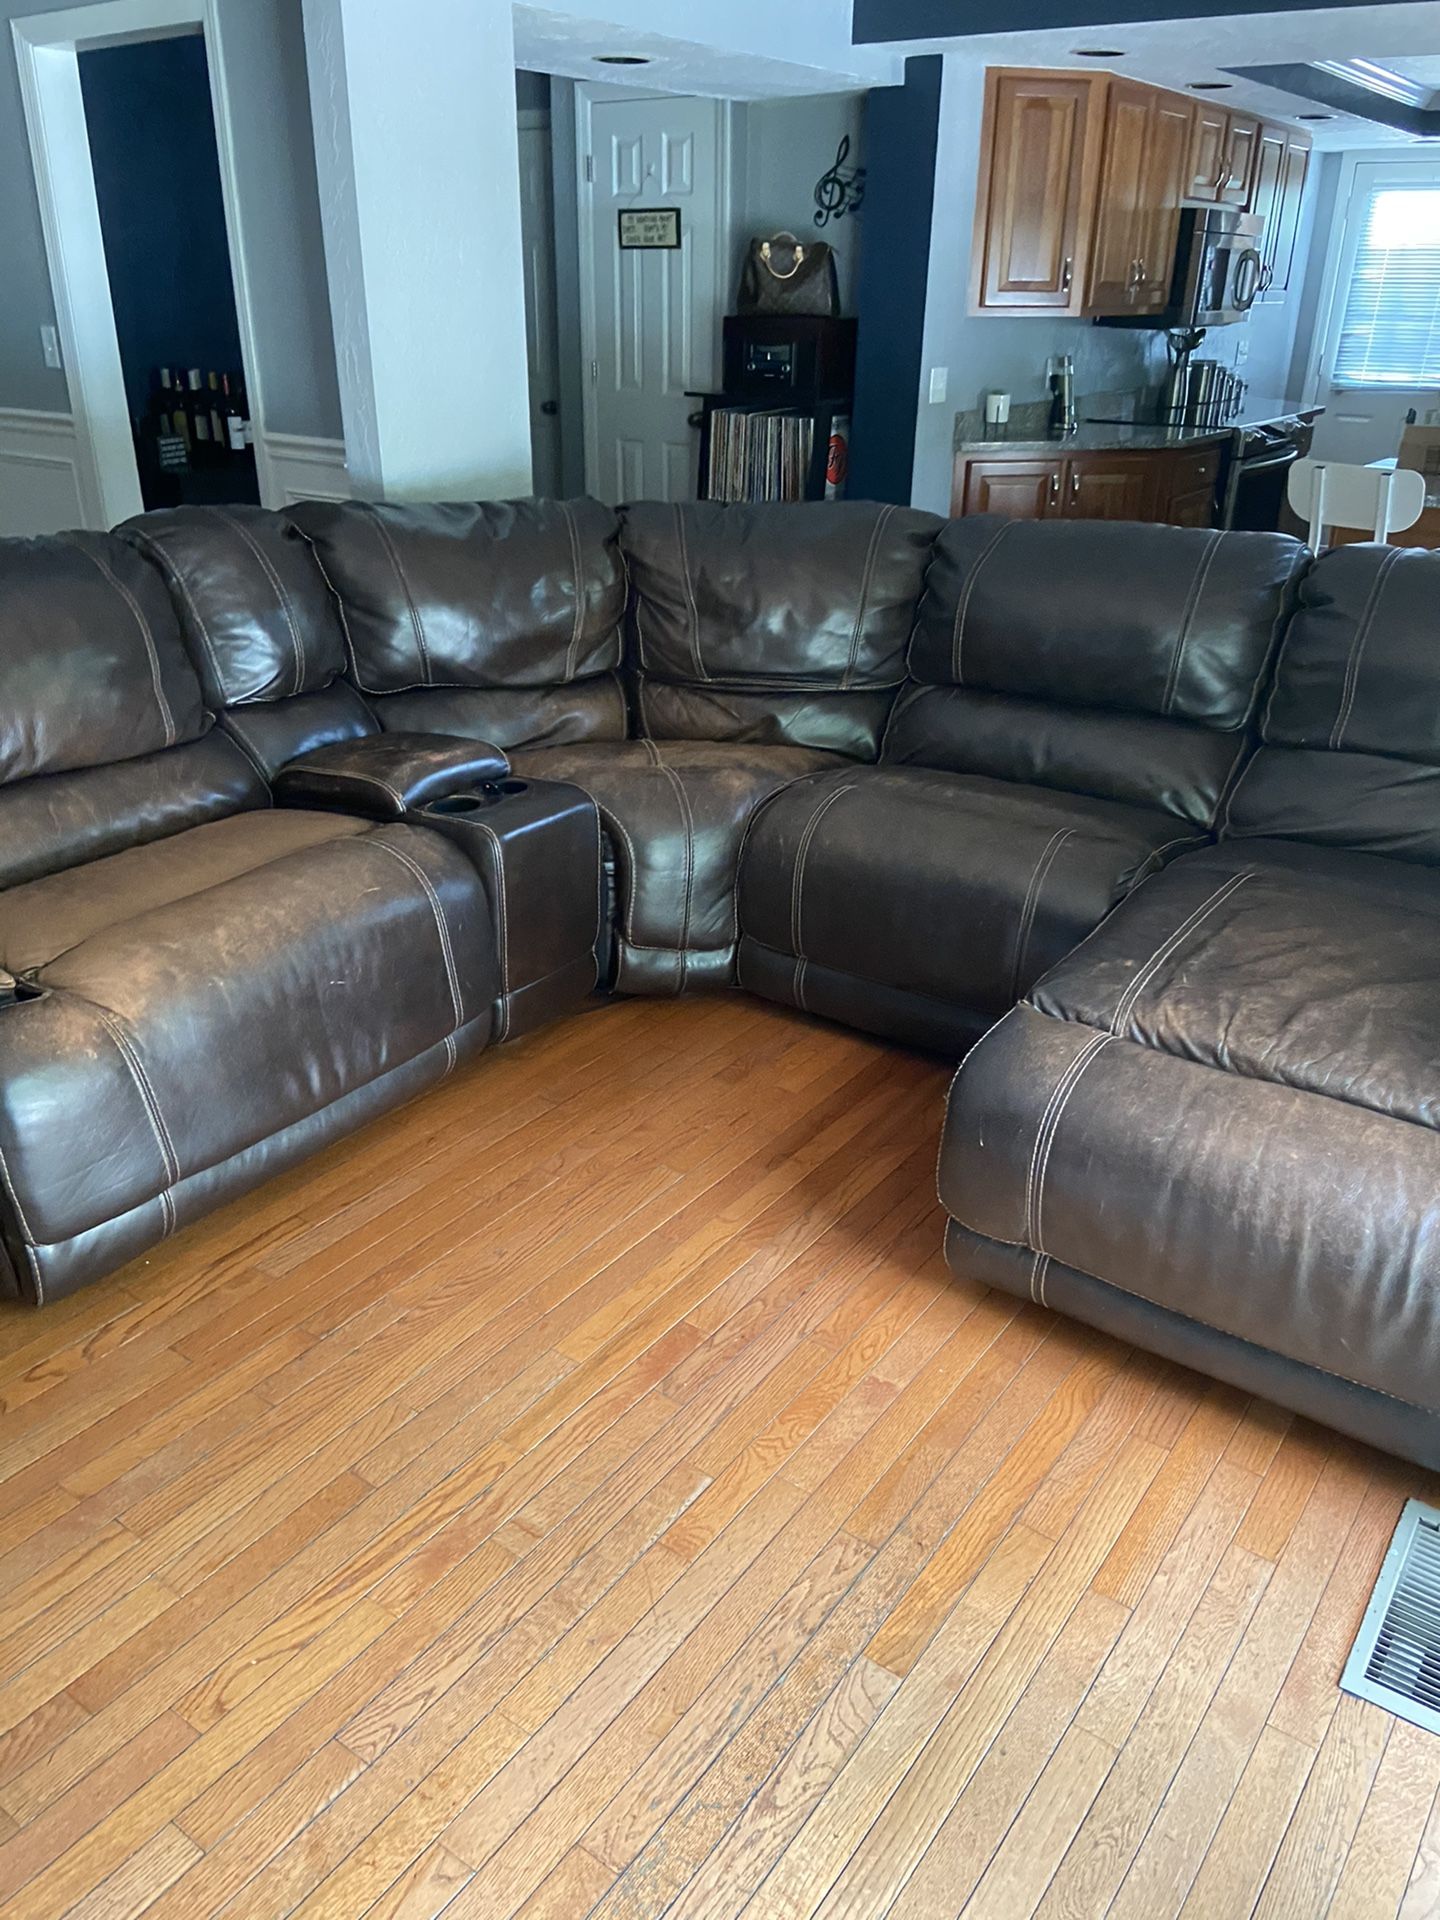 FREE!! Couch with recliners